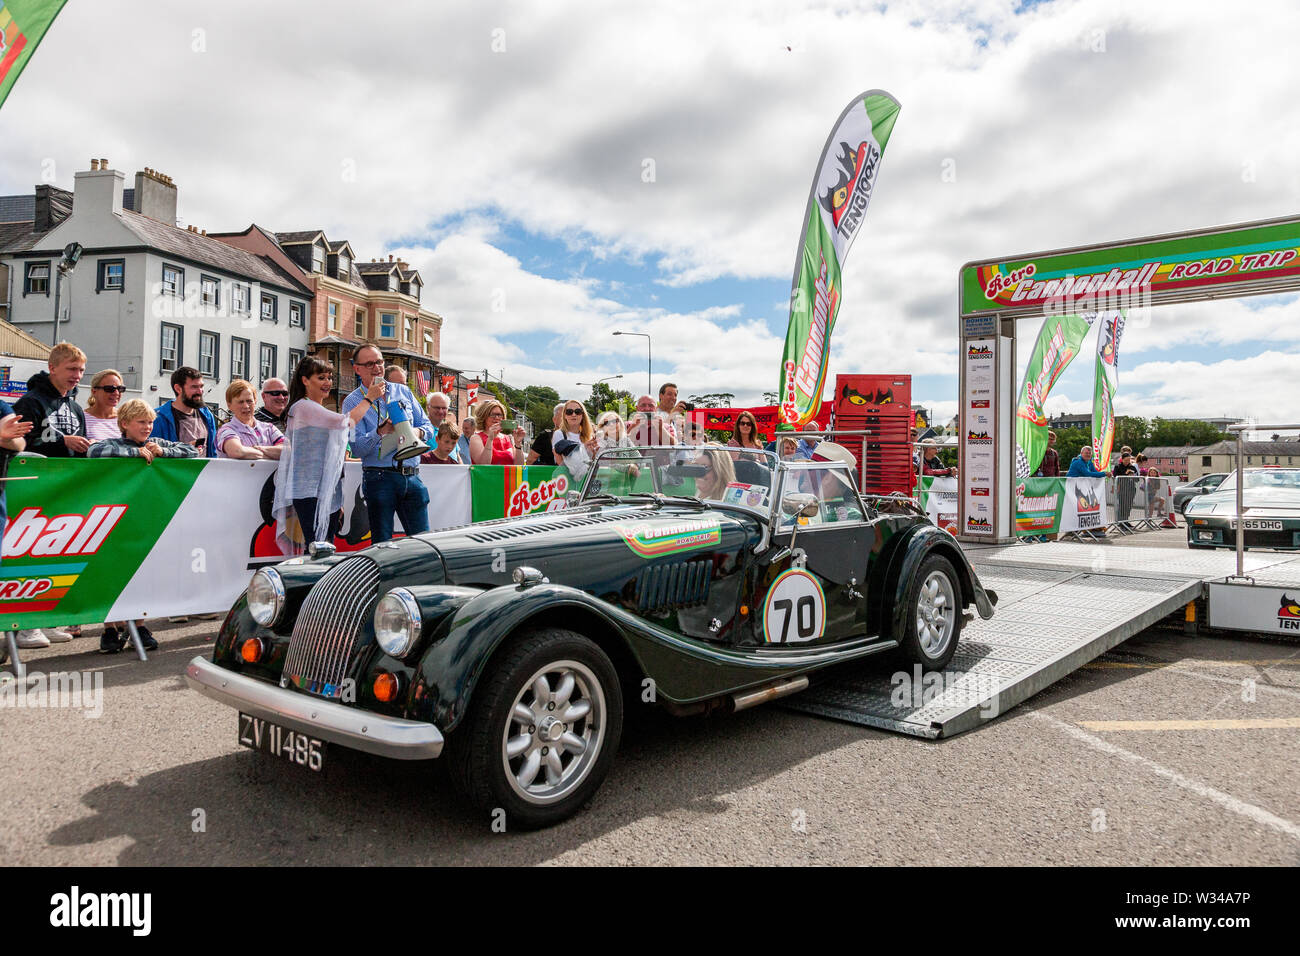 Kinsale, Cork, Ireland. 12th July, 2019. Con and Grace Mulvihill with their 1988 Morgan 44 at the starting line of the Cannononball Retro Road Trip in Kinsale, Co. Cork, Ireland. The classic run starts in Kinsale and takes in Healy Pass, Kenmare, Molls Gap, Inch Beach, Dingle, Slea Head, Conor Pass, Tralee and finishes at Bunratty Castle on July 13th 2019. Credit: David Creedon/Alamy Live News Stock Photo